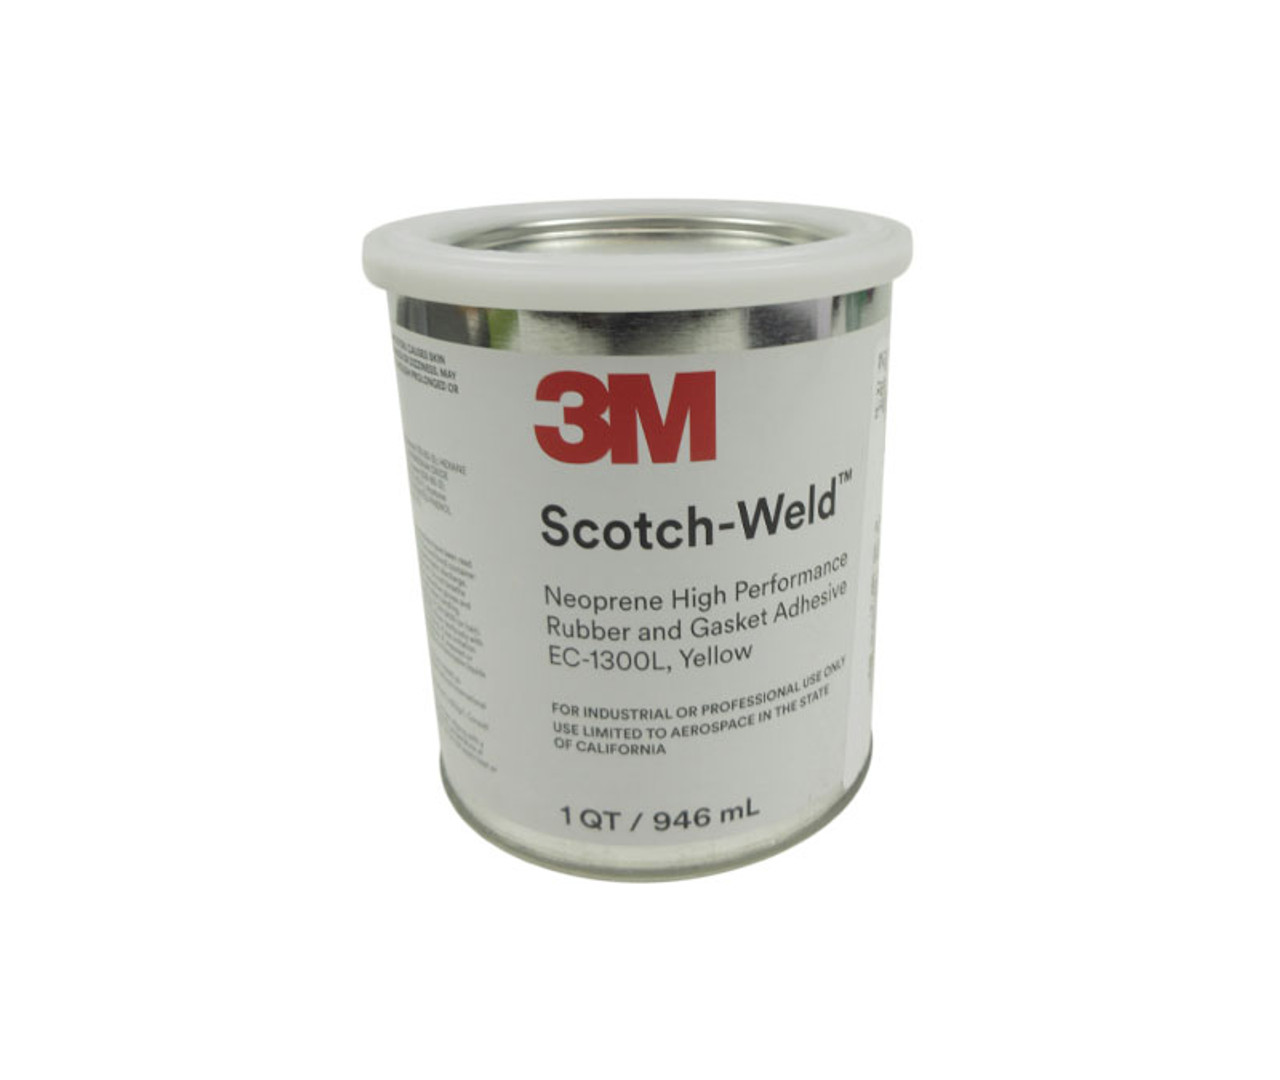 3M 021200-19928 Scotch-Weld EC-1300L Yellow Neoprene High Performance  Rubber & Gasket Adhesive - Quart Can at